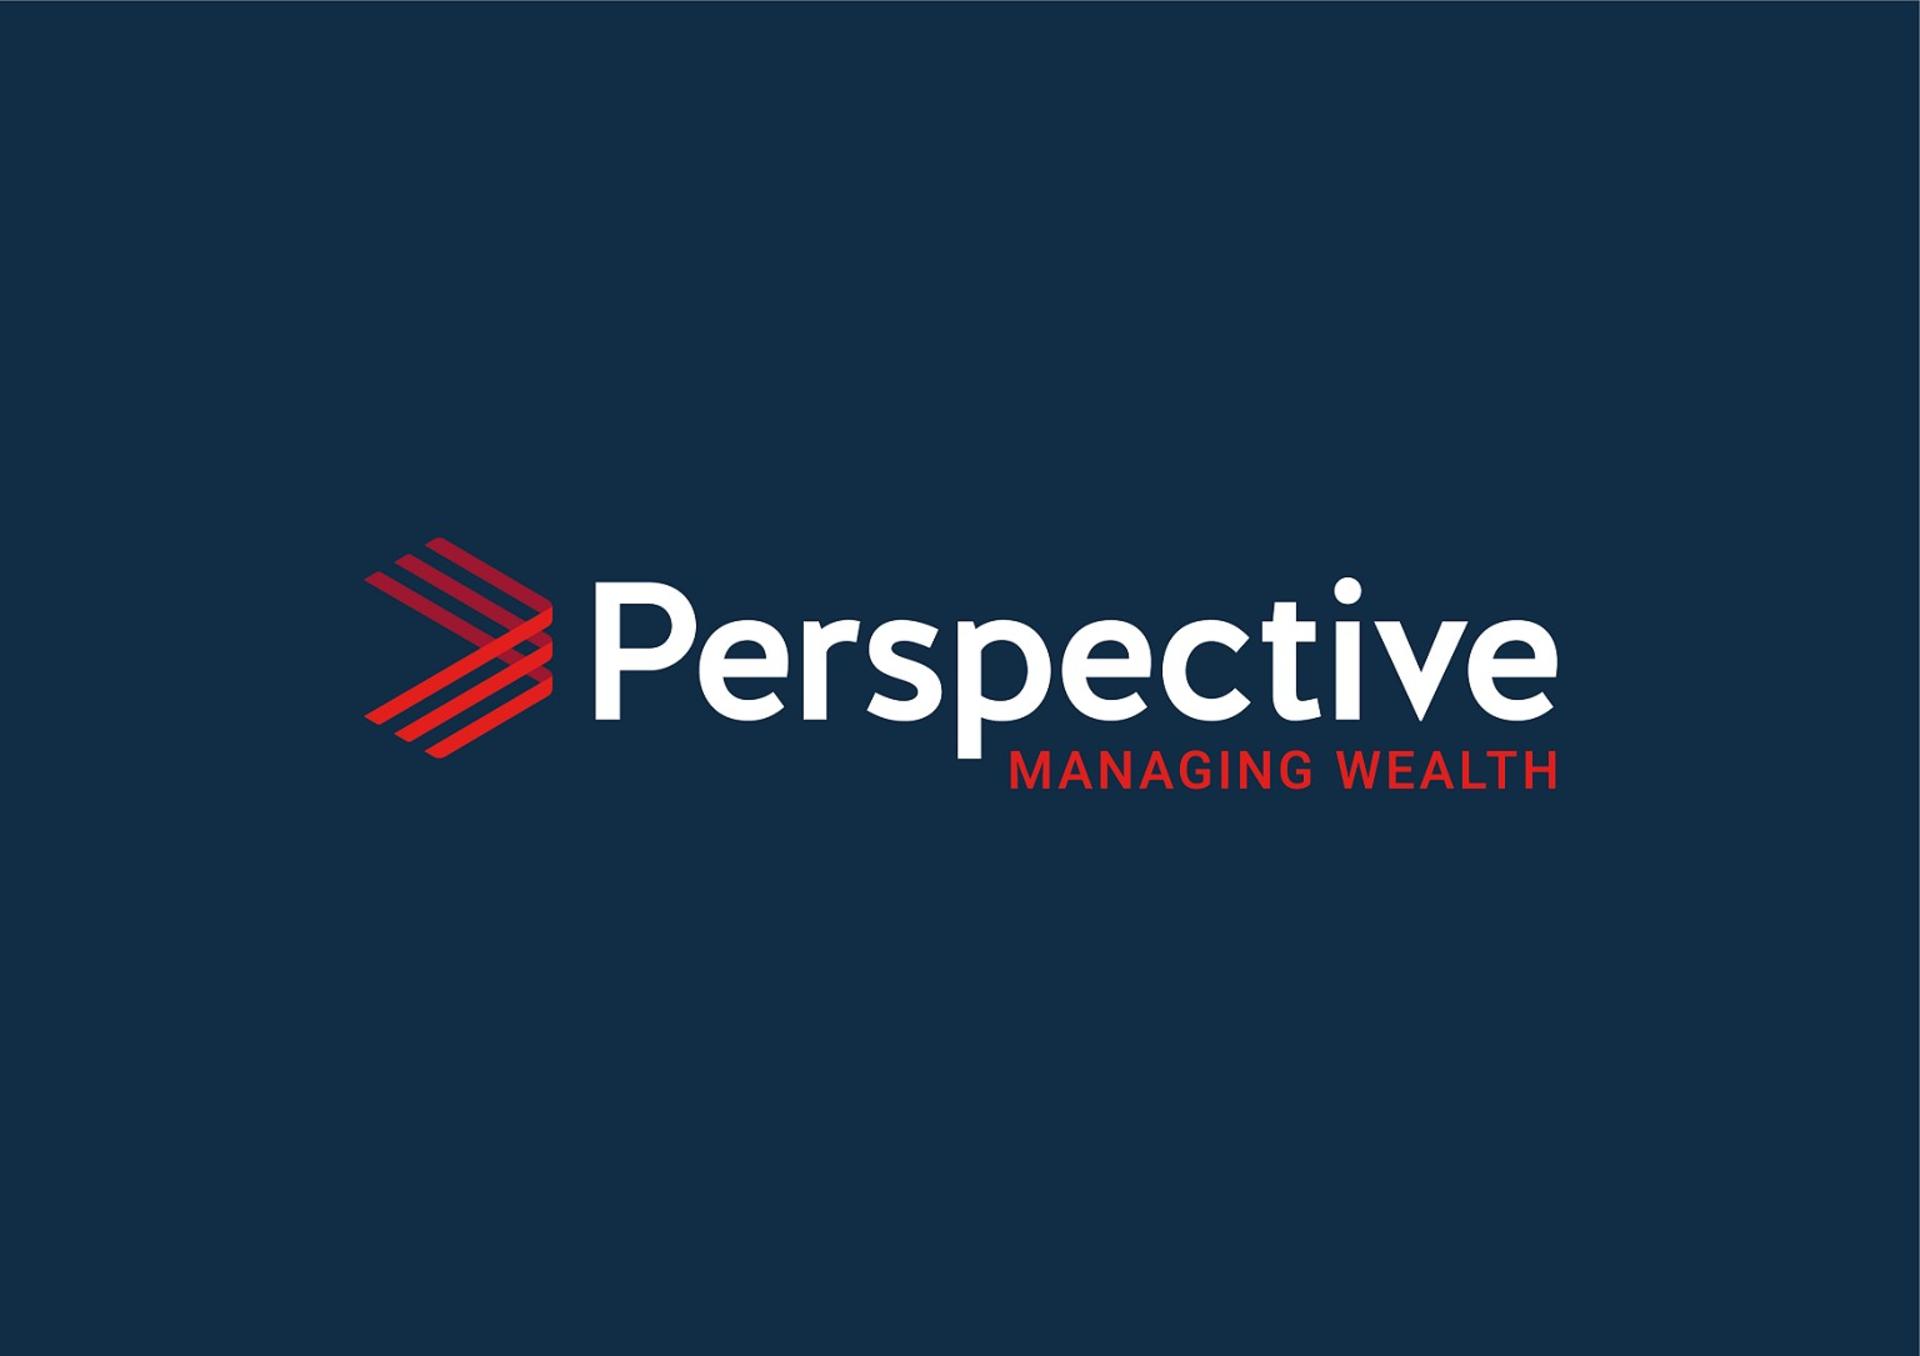 Perspective makes seventh acquisition of 2021 as advice M&A surge continues